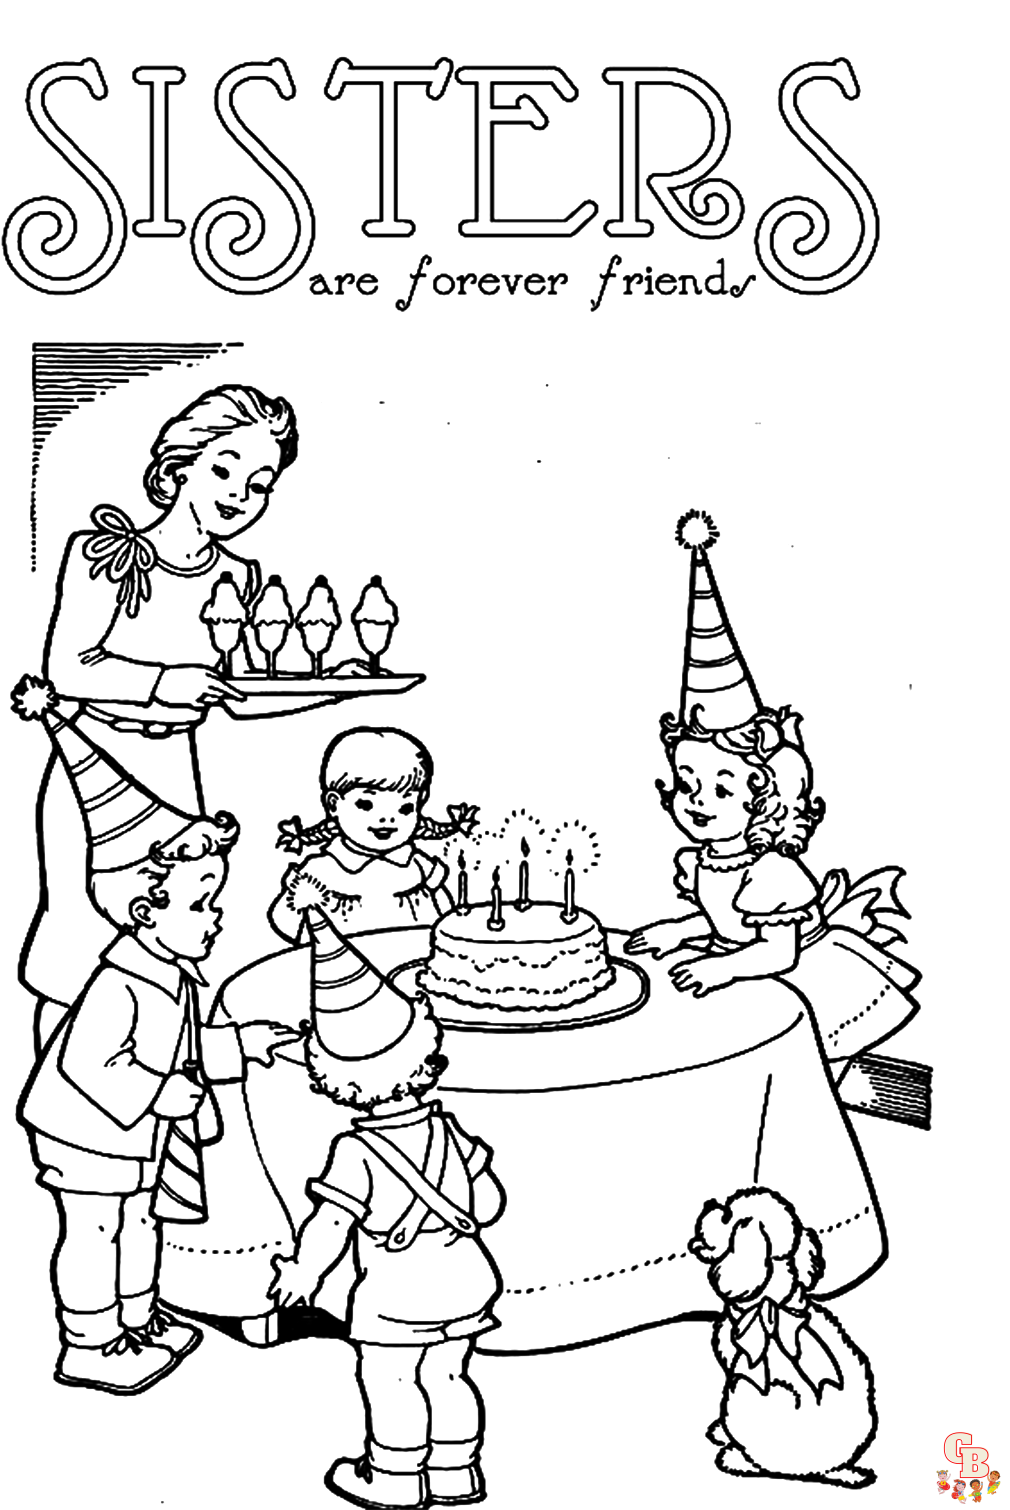 party on sisters day coloring page